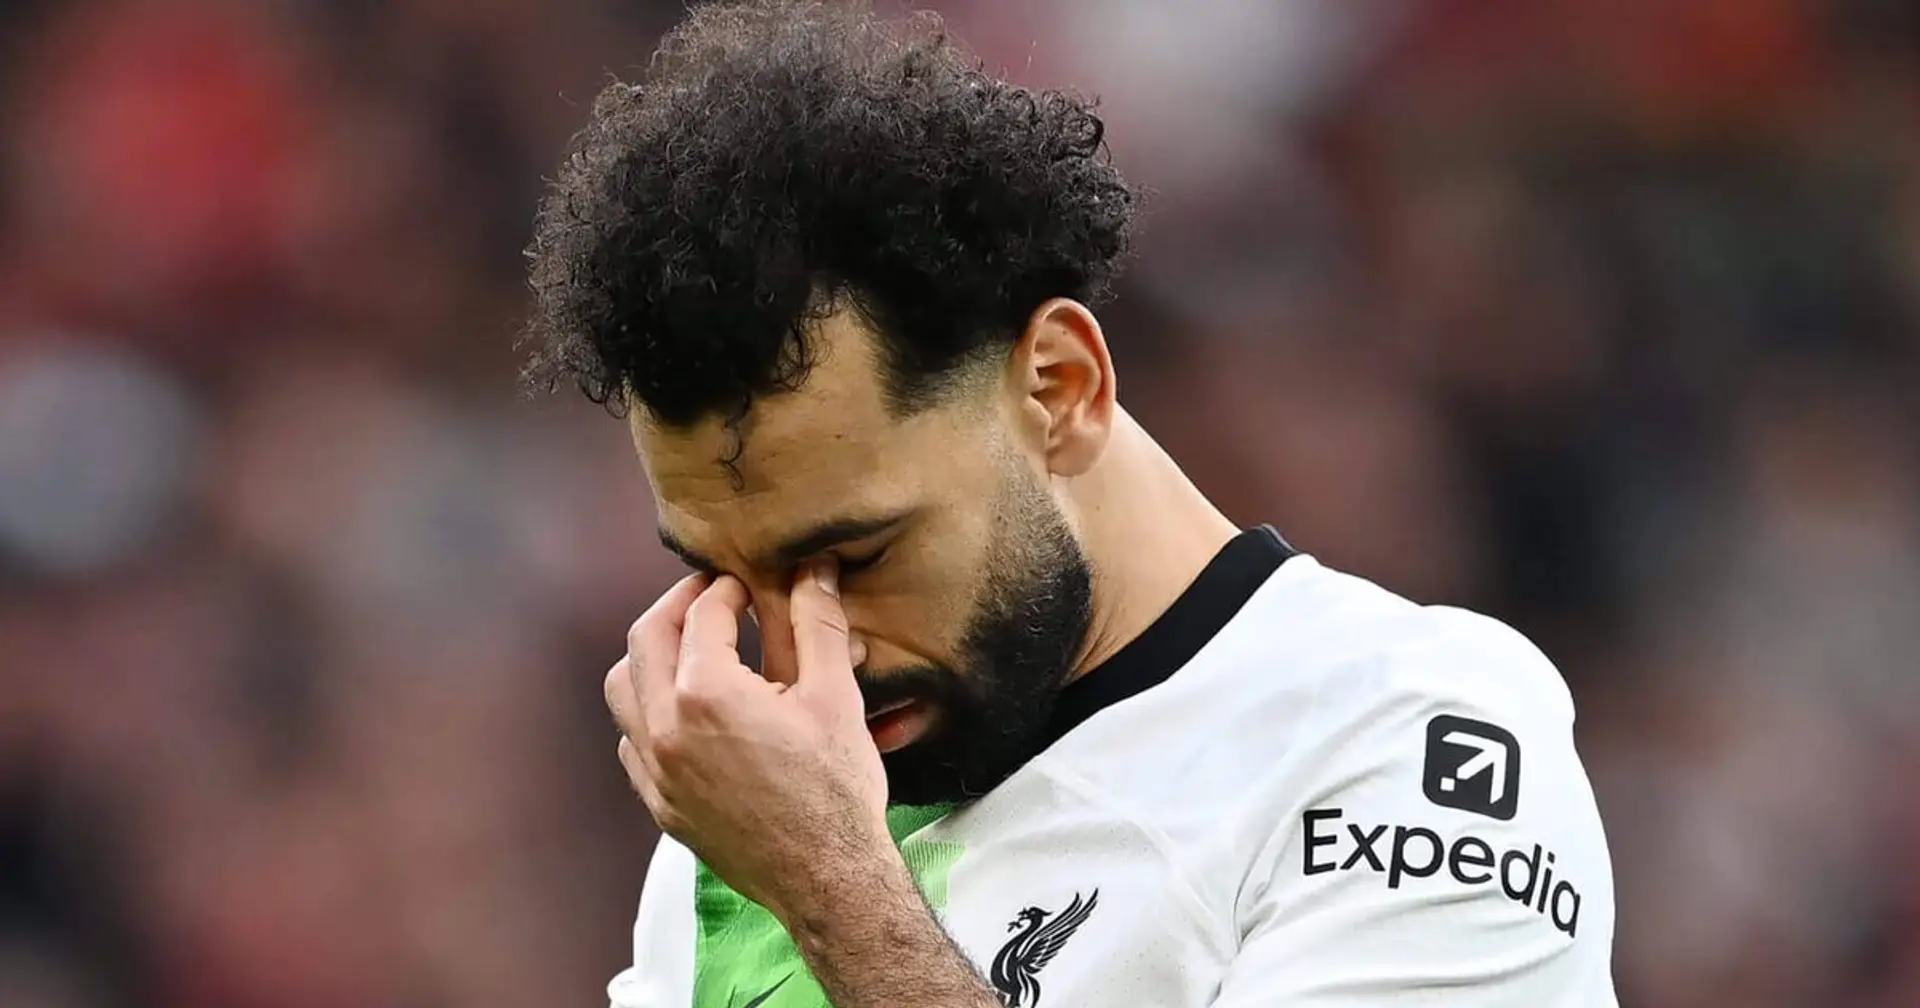 Liverpool could consider Salah sale & 2 more big stories you might've missed